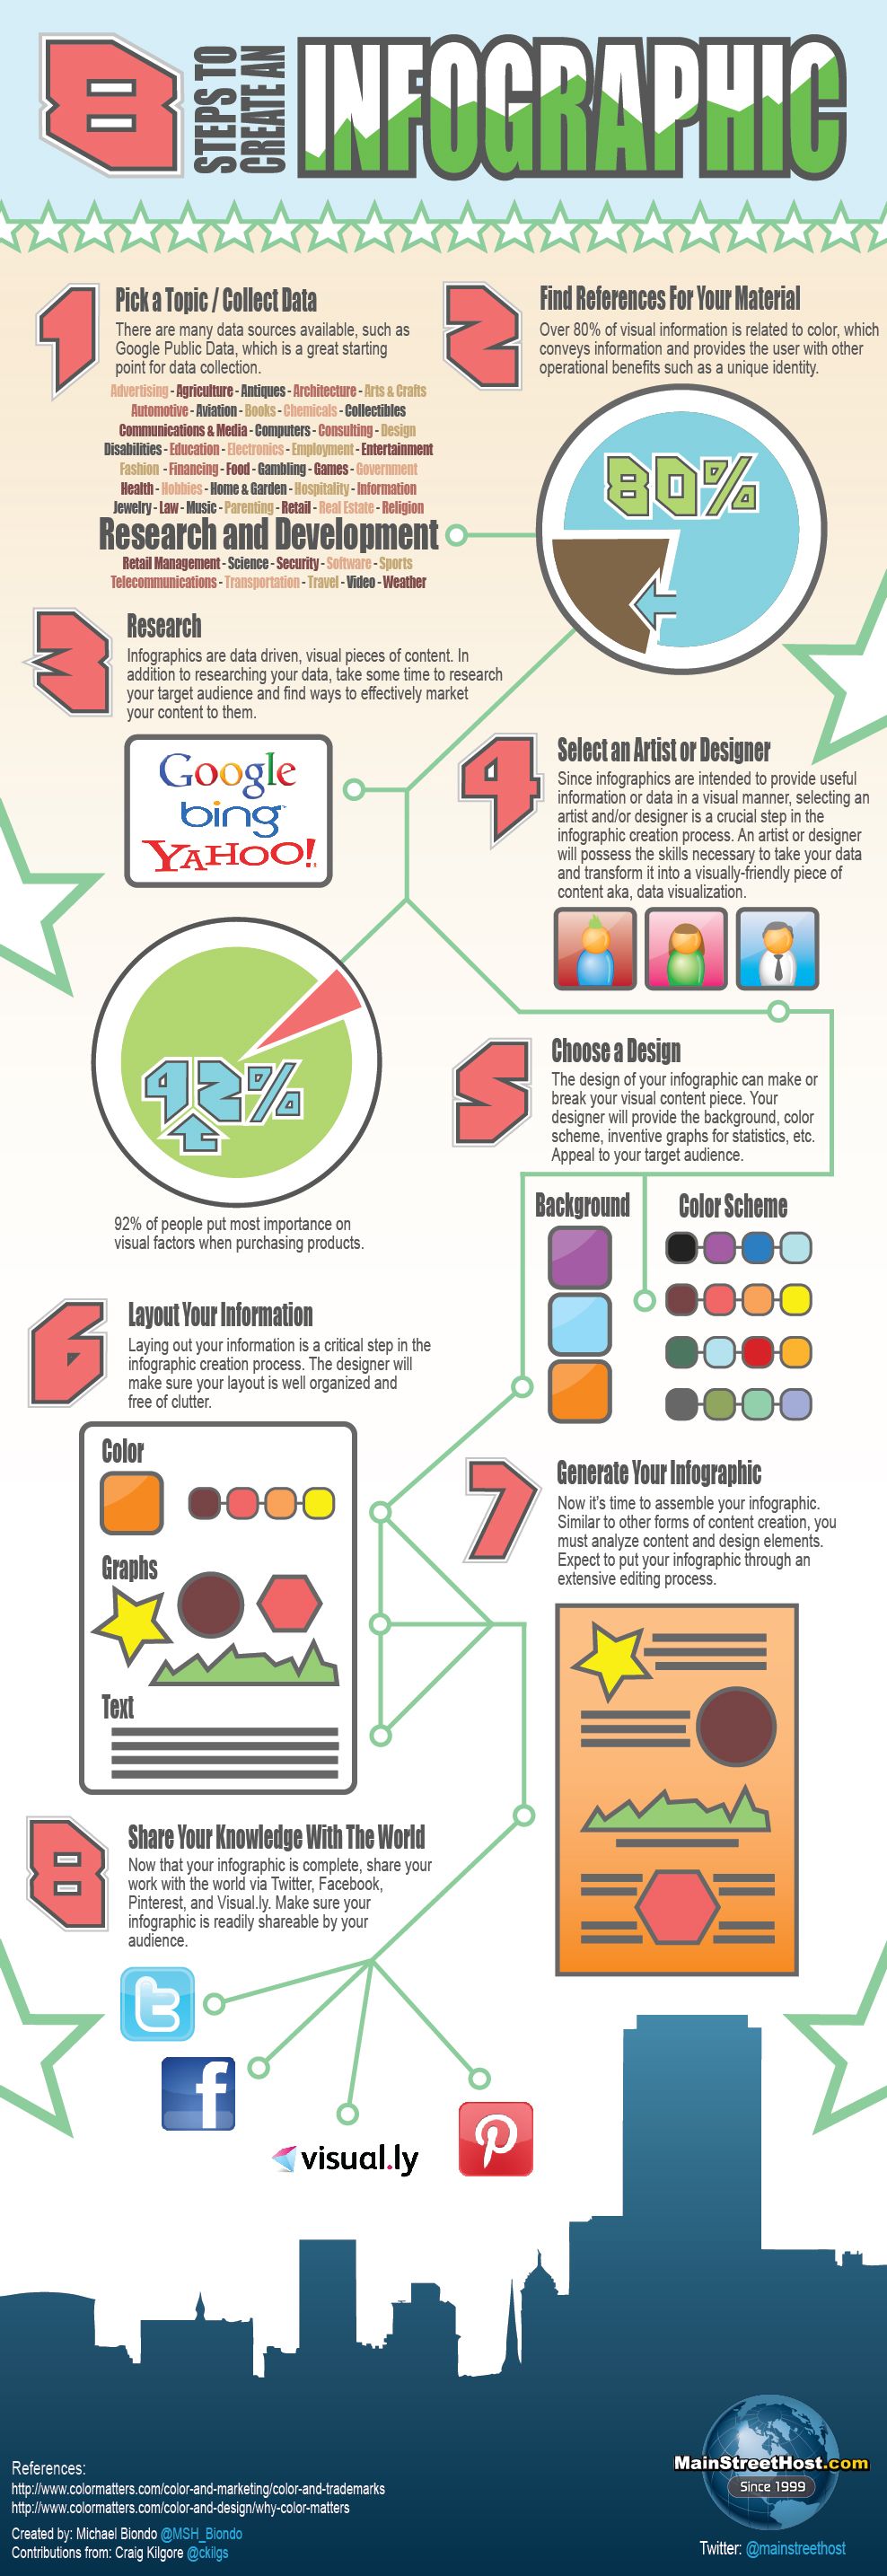 How to Create an Infographic